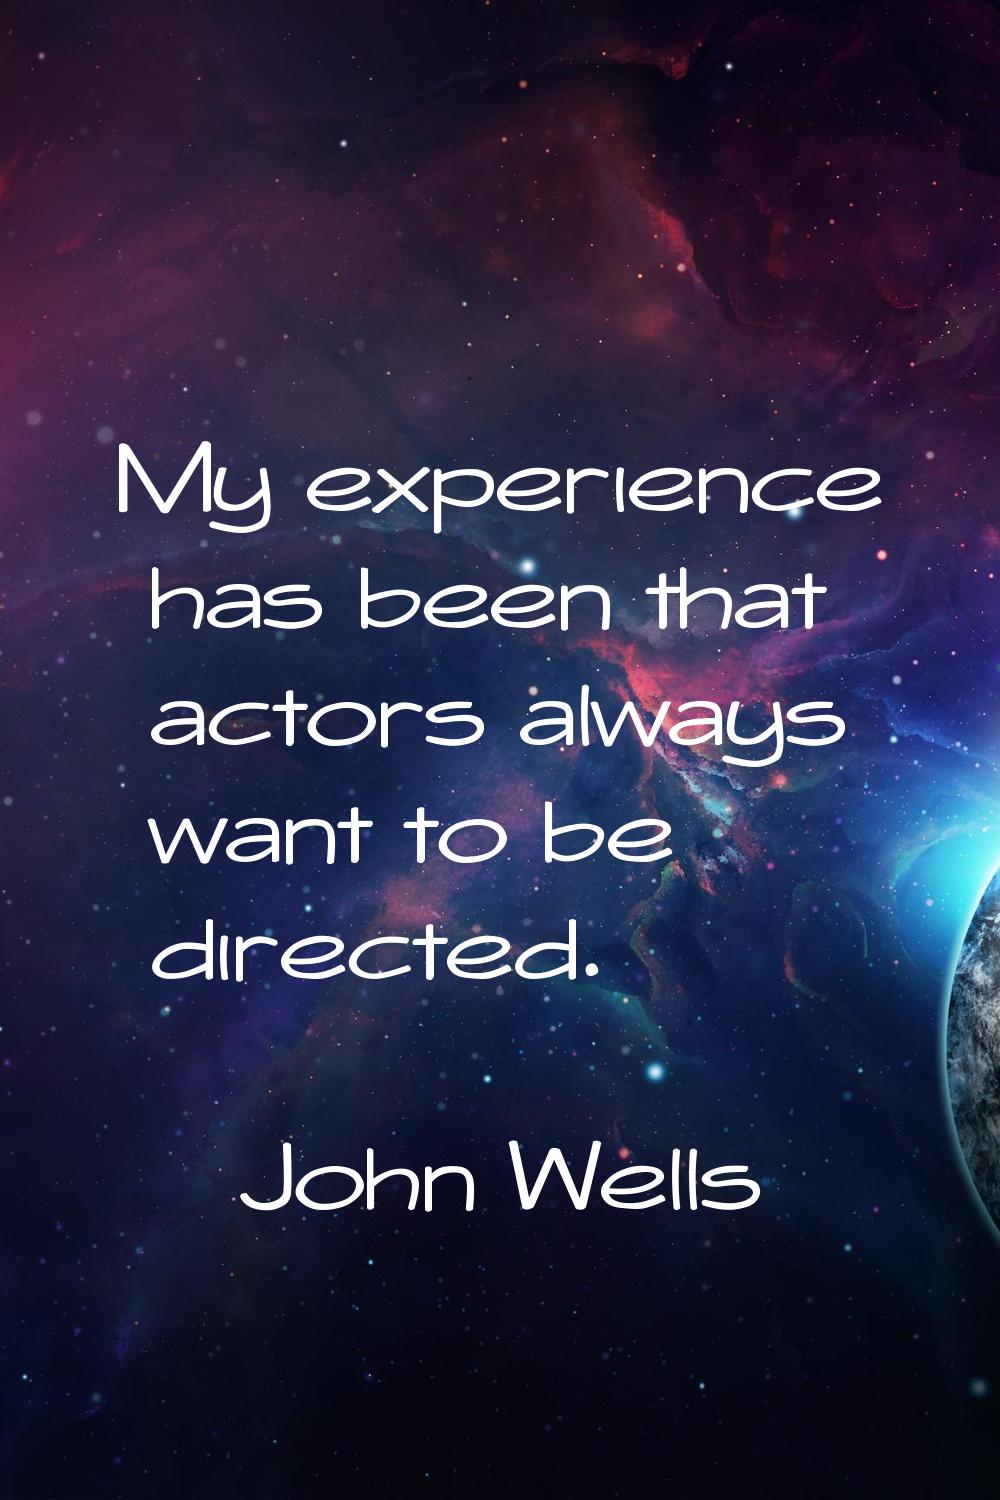 My experience has been that actors always want to be directed.